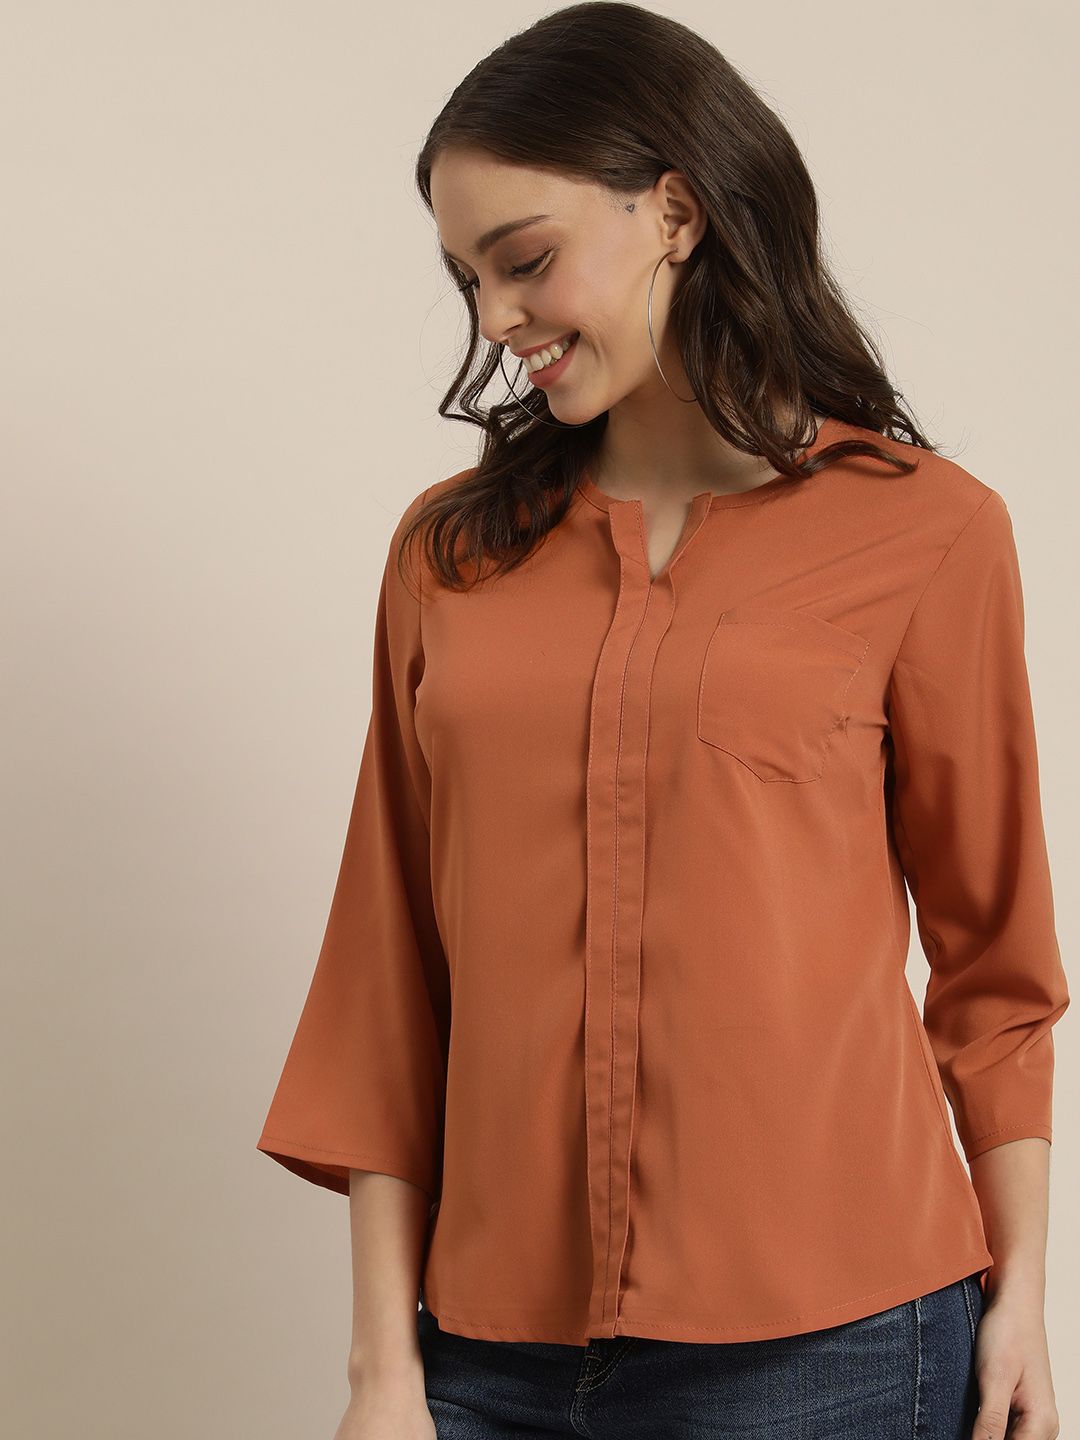 encore by INVICTUS Women Rust Brown Solid V-Neck Blouson Top with Chest Pocket Price in India